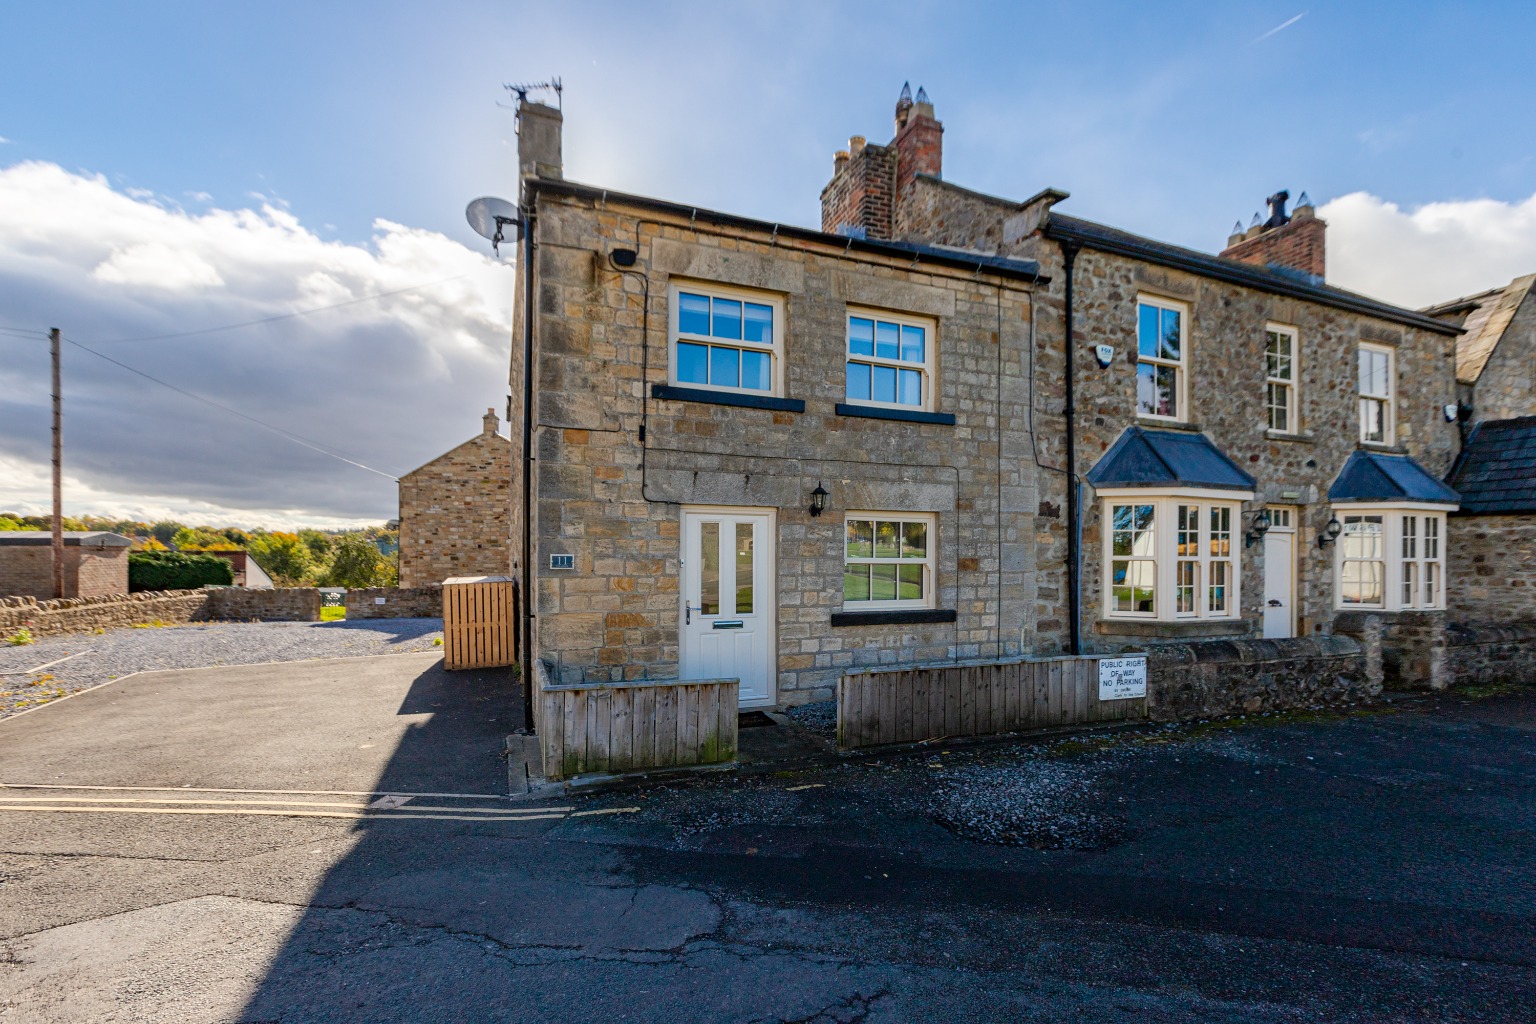 3 bed cottage to rent, Catterick Garrison - Property Image 1